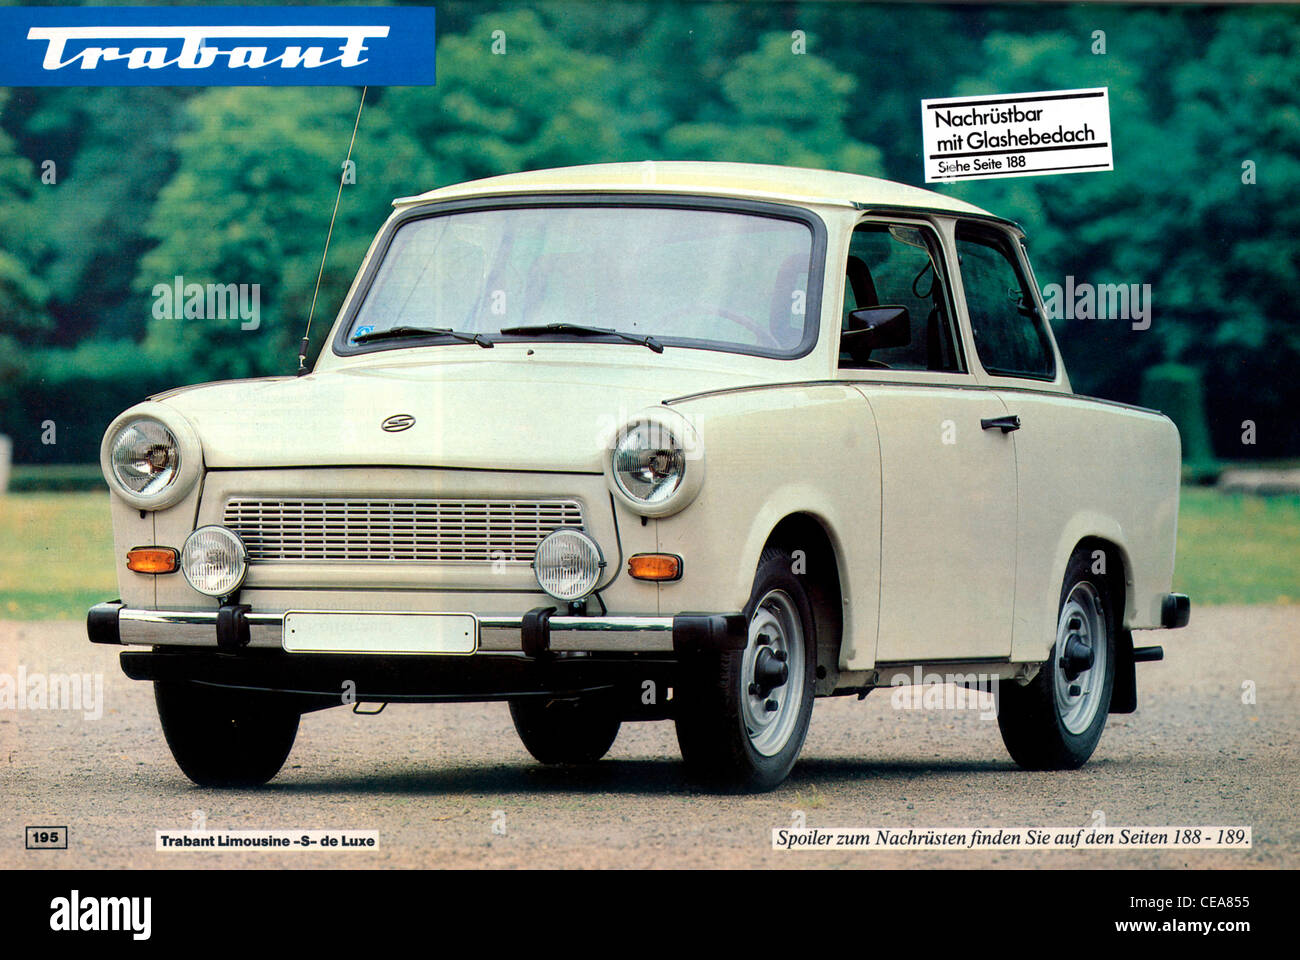 Catalogue of Genex Geschenkdienst of the GDR with the supply of a car as a present of foreigners to East German. Stock Photo